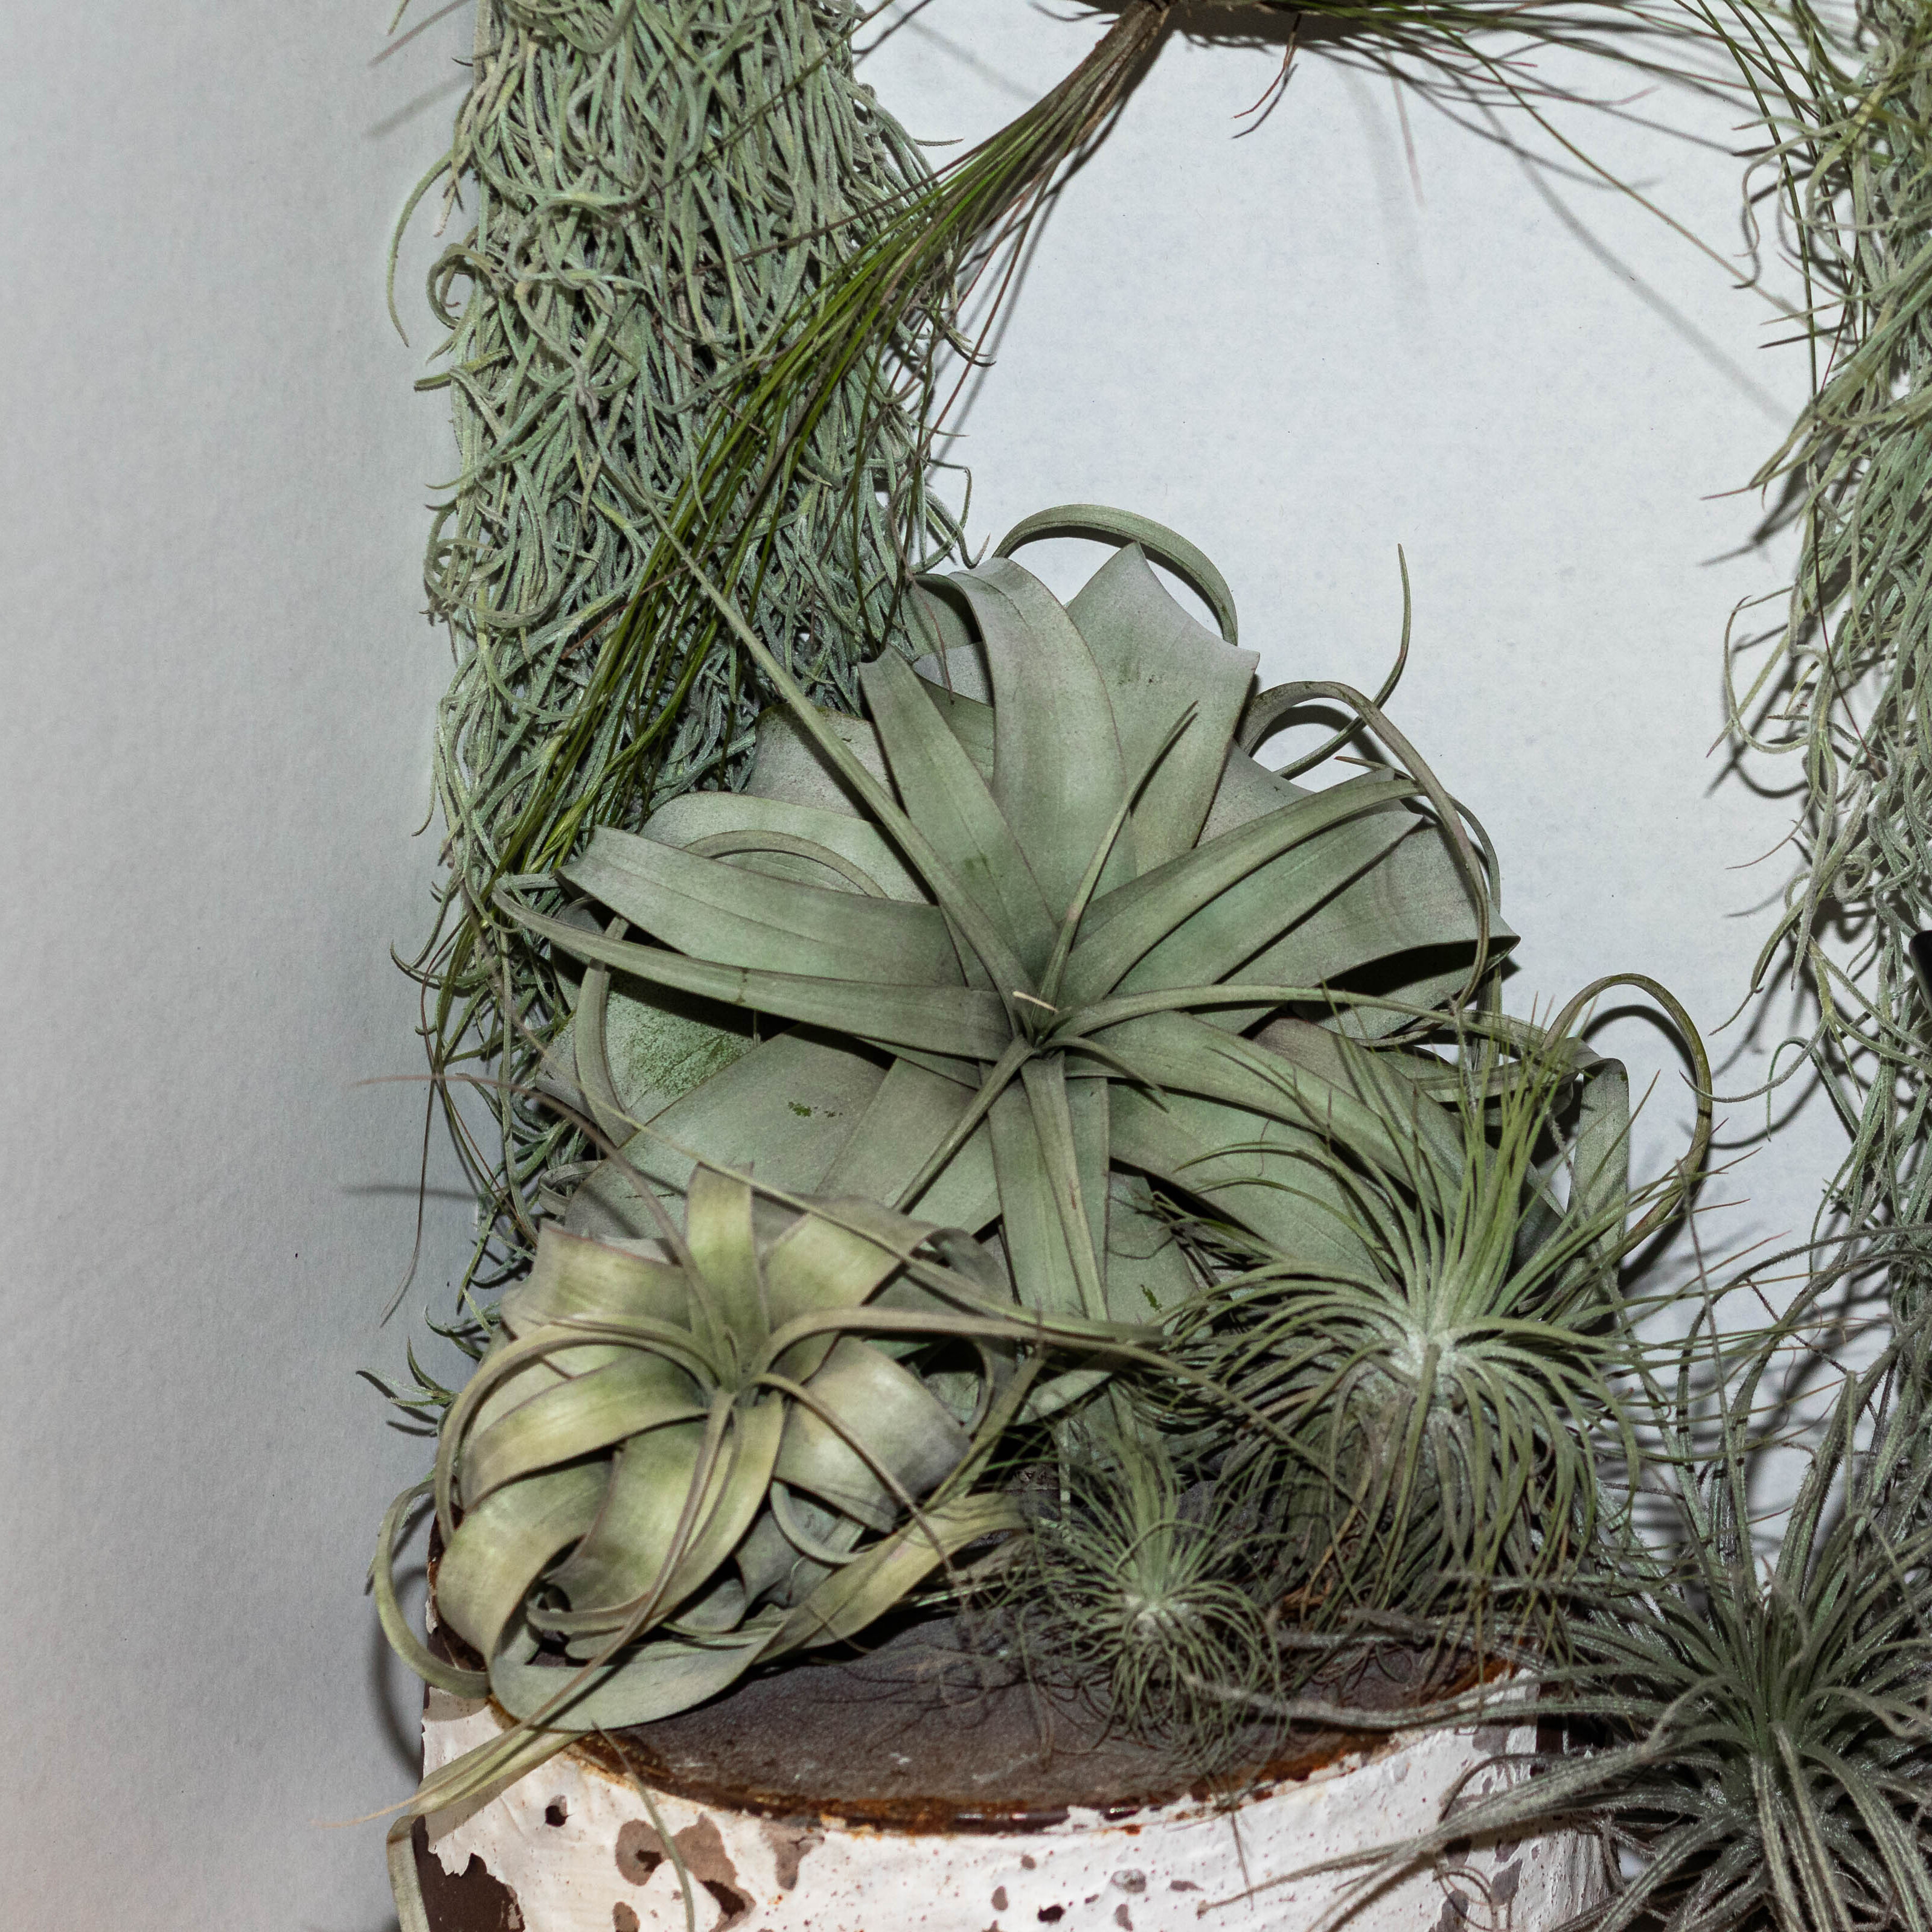 
  			<h4>Easy, Trendy, and the Options are Endless - Air Plants! (Tillandsia)</h4>
      		<p>These plants are perfect for the busy student! You don’t have to worry about soil or watering frequency. All you do to care for air plants is keep them in bright indirect light and dunk them in a bowl of water for thirty minutes once a week! In the winter they might want an extra soak (with the heater on, they’ll dry out quicker), so keep an eye out for brown tips.
      		</p>
      		